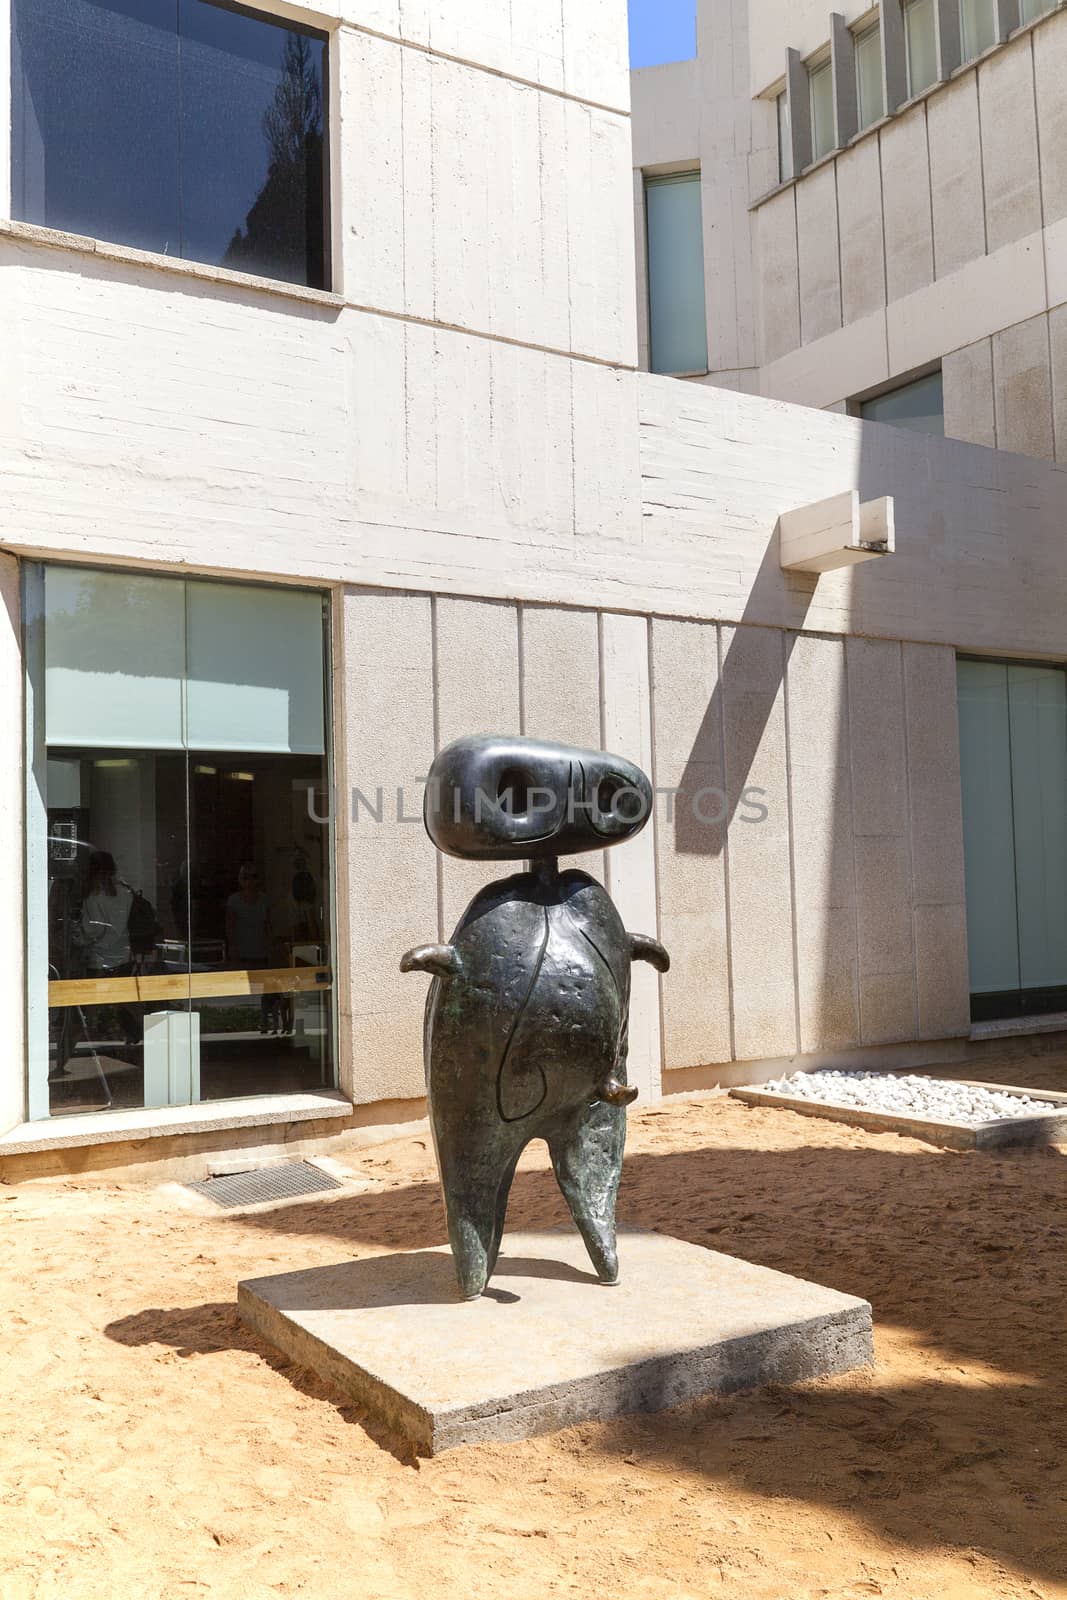 Sculpture by Miro before entering to Joan Miro Foundation ,  Barcelona, Spain by mychadre77